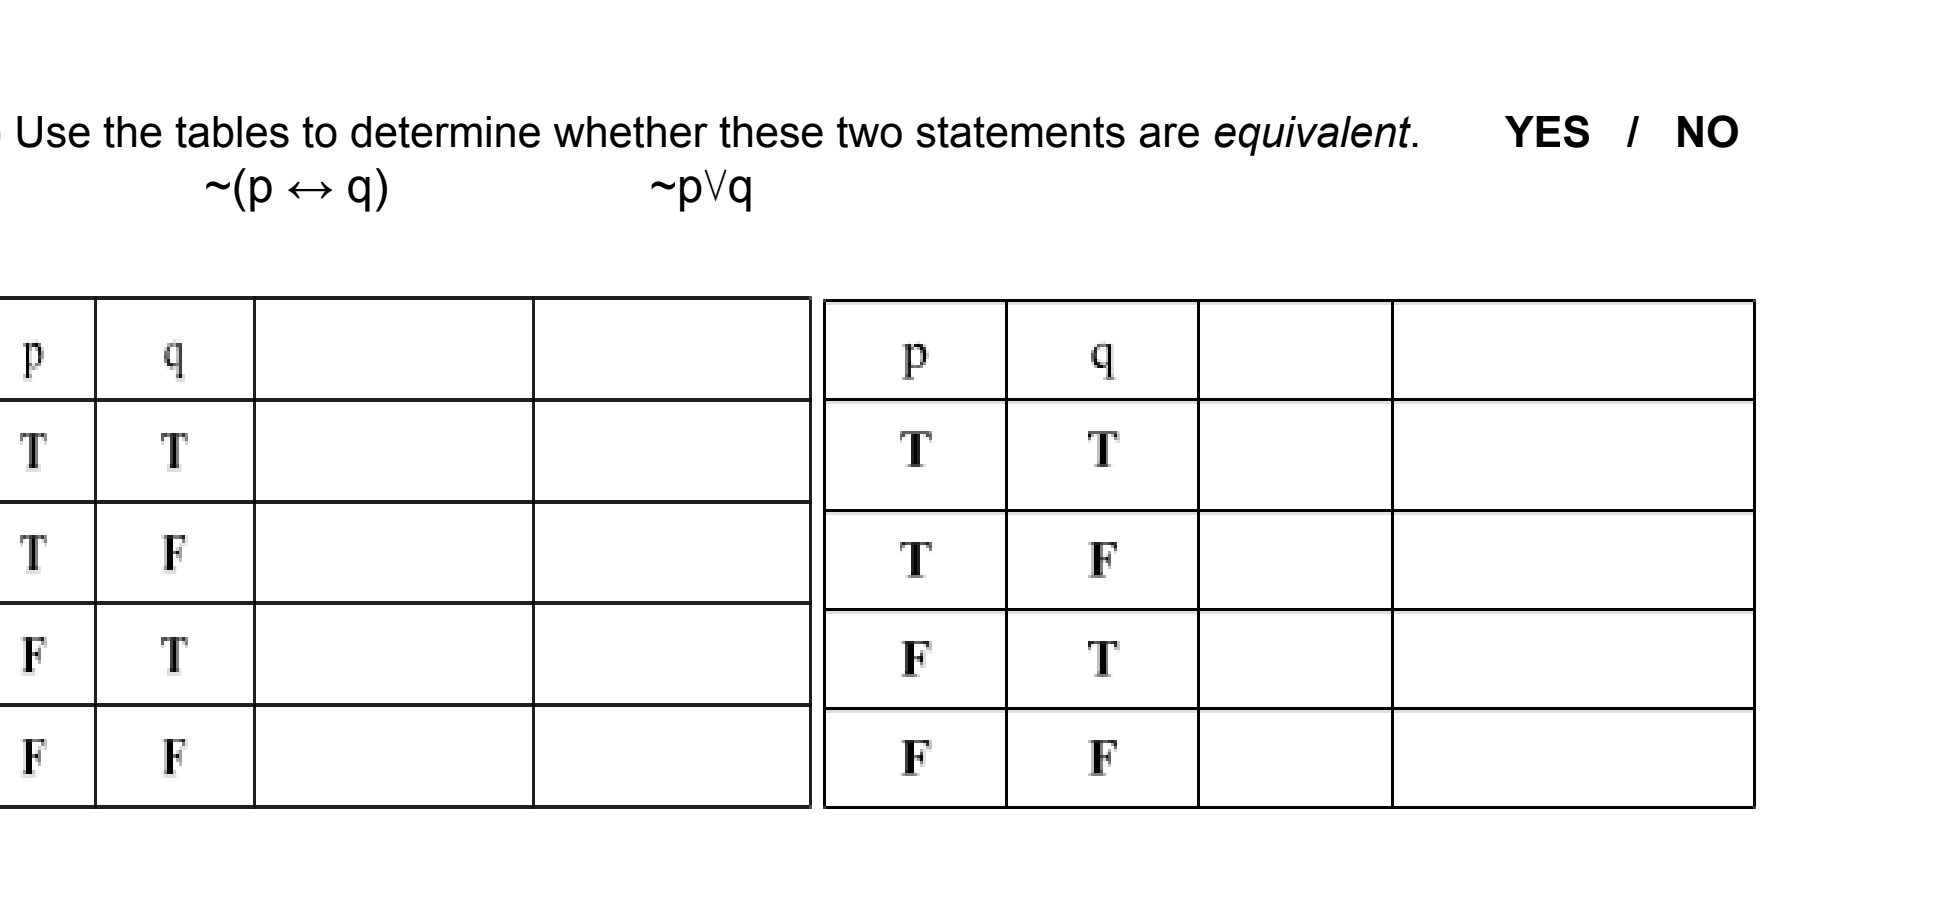 YES / NO
Use the tables to determine whether these two statements are equivalent.
pVq
9
